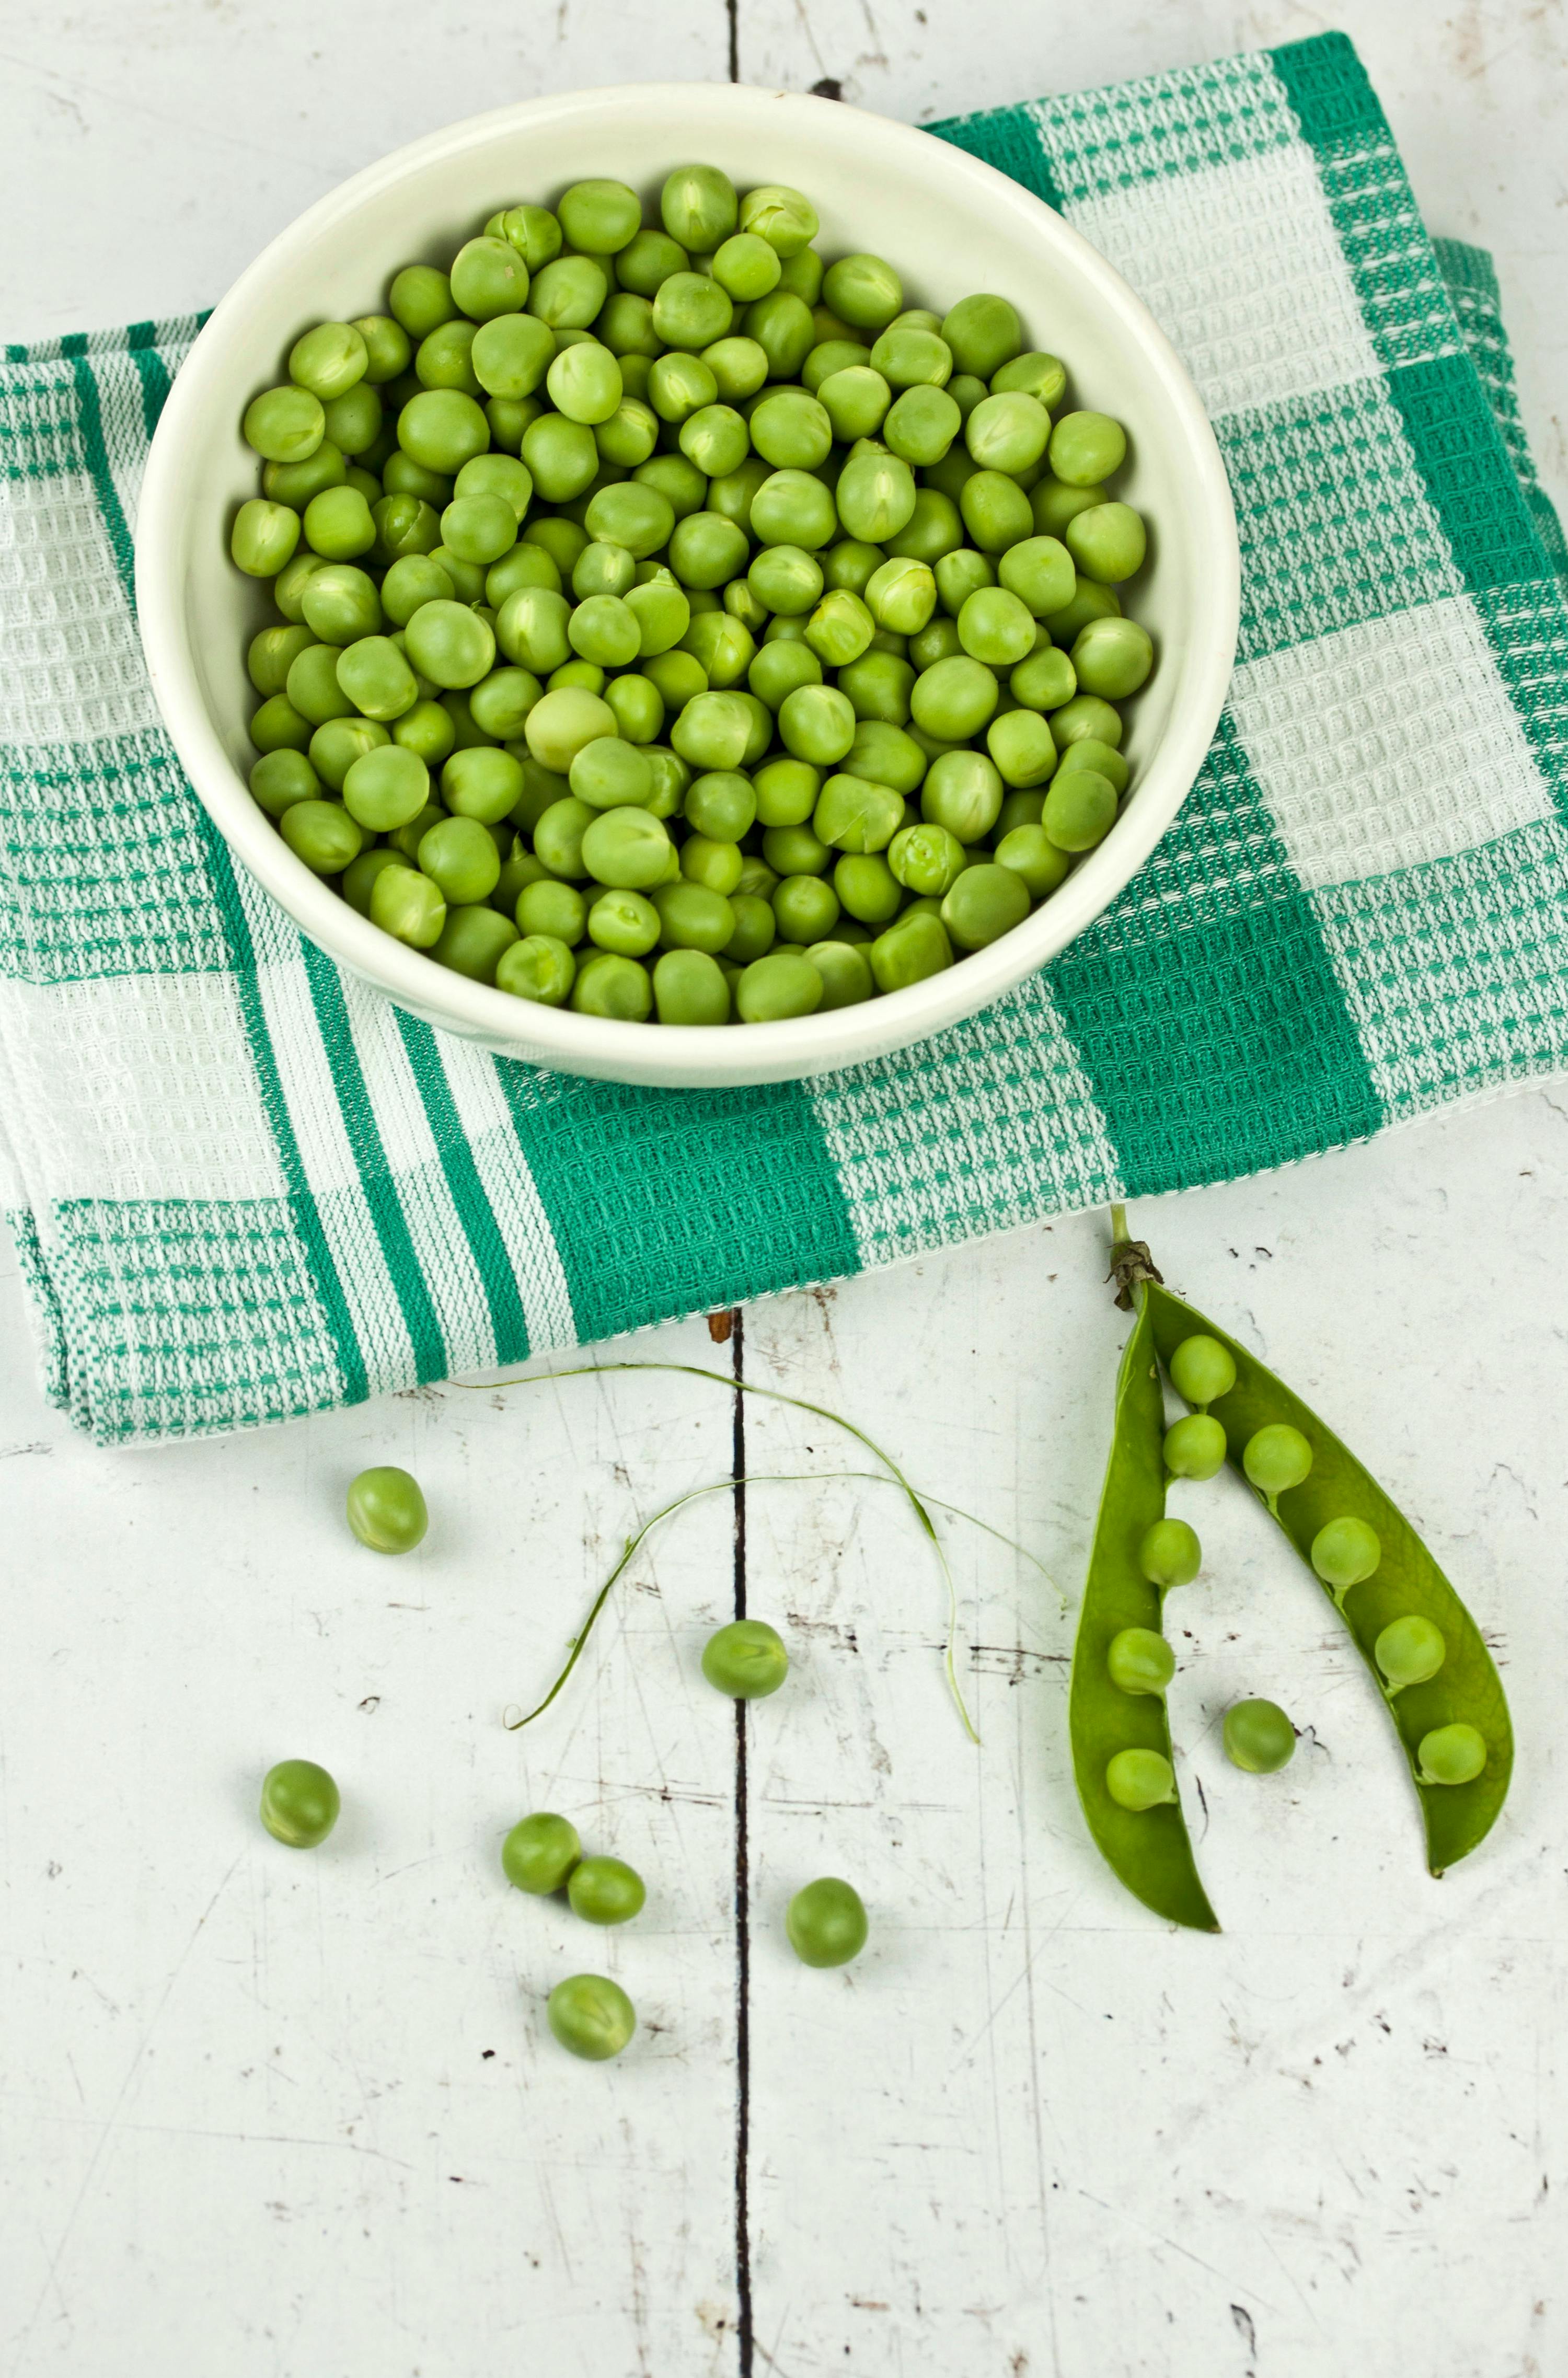 HD wallpaper Peas Garden Pods Beds the cultivation of green peas  vegetables legumes  Wallpaper Flare